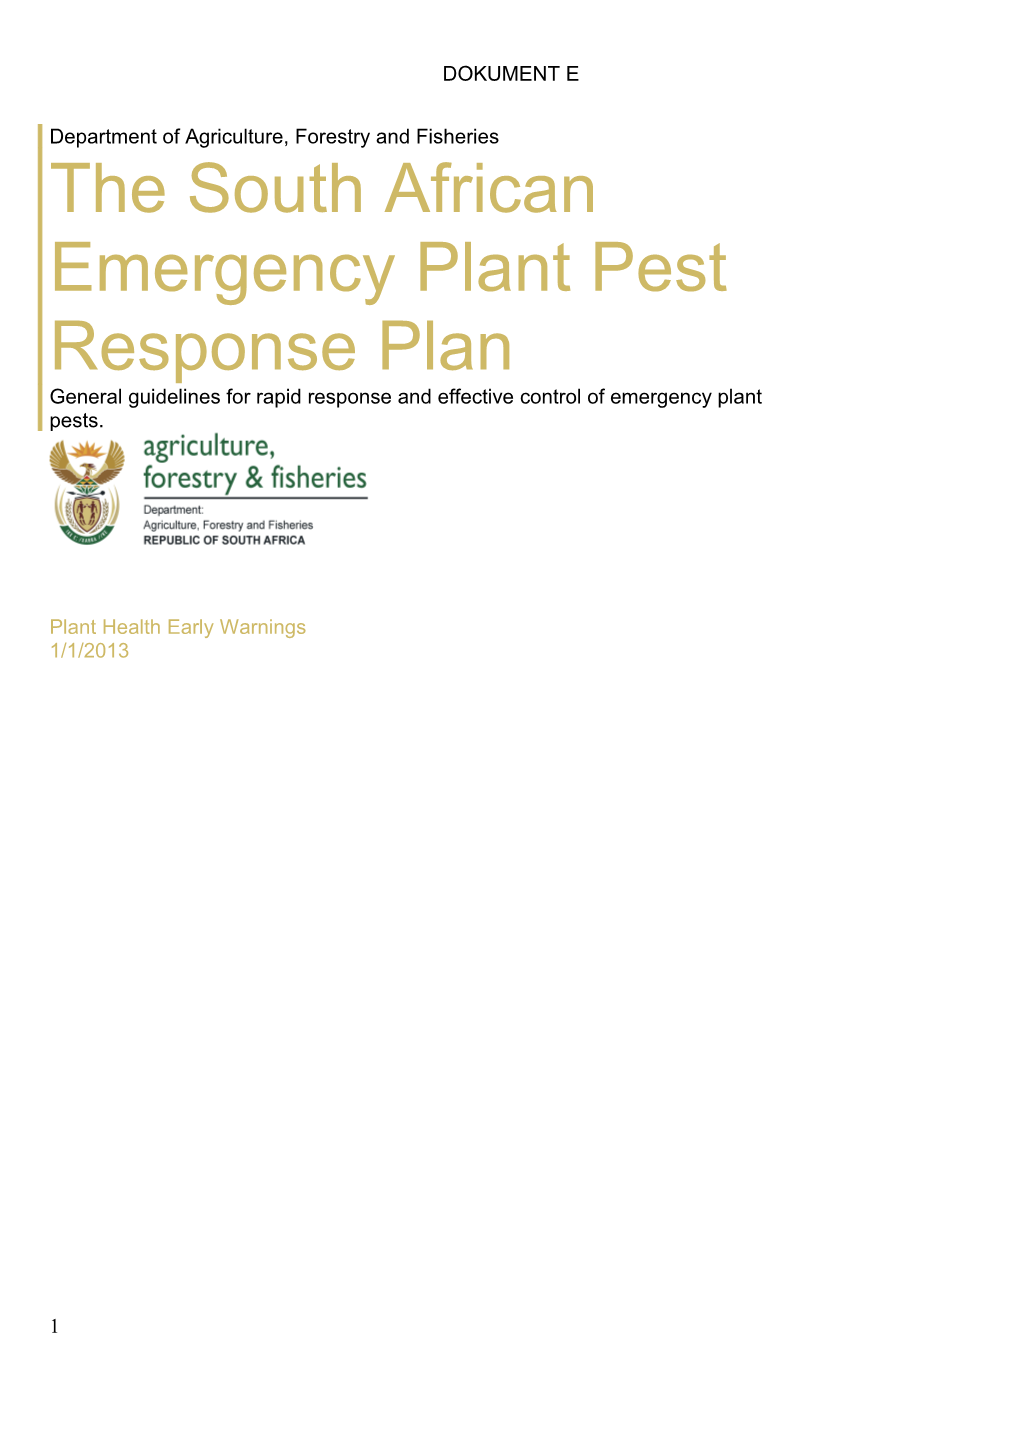 The South African Emergency Plant Pest Response Plan